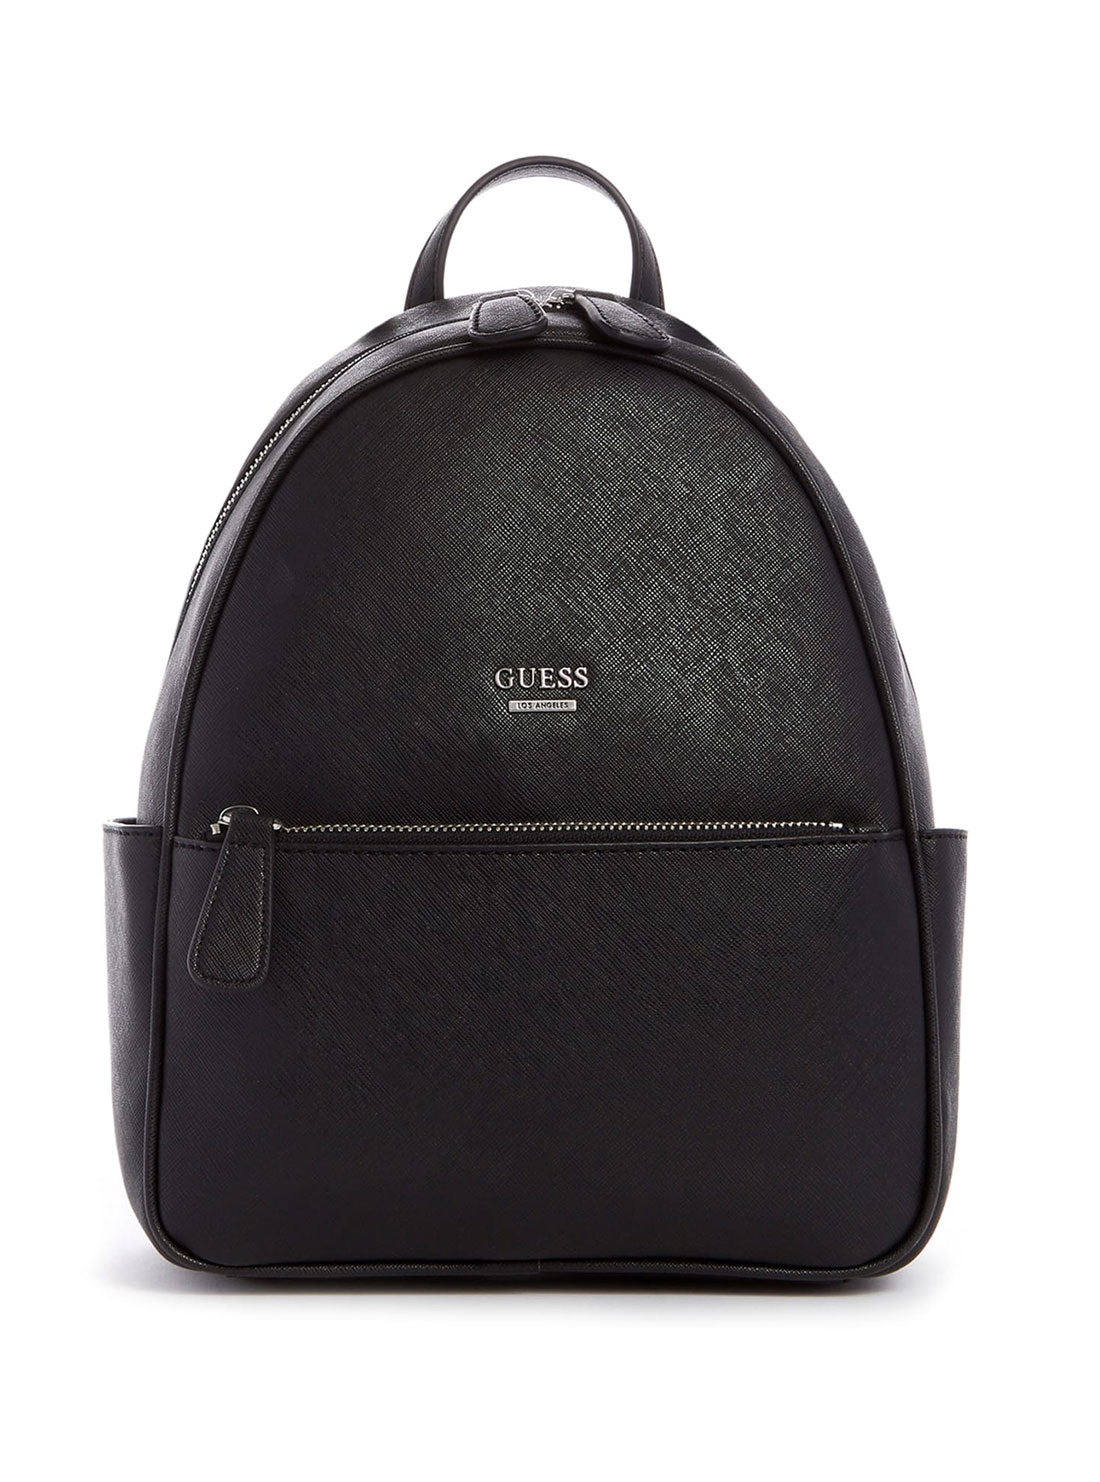 GUESS Women's Black Hastings Backpack LE771630 Front View